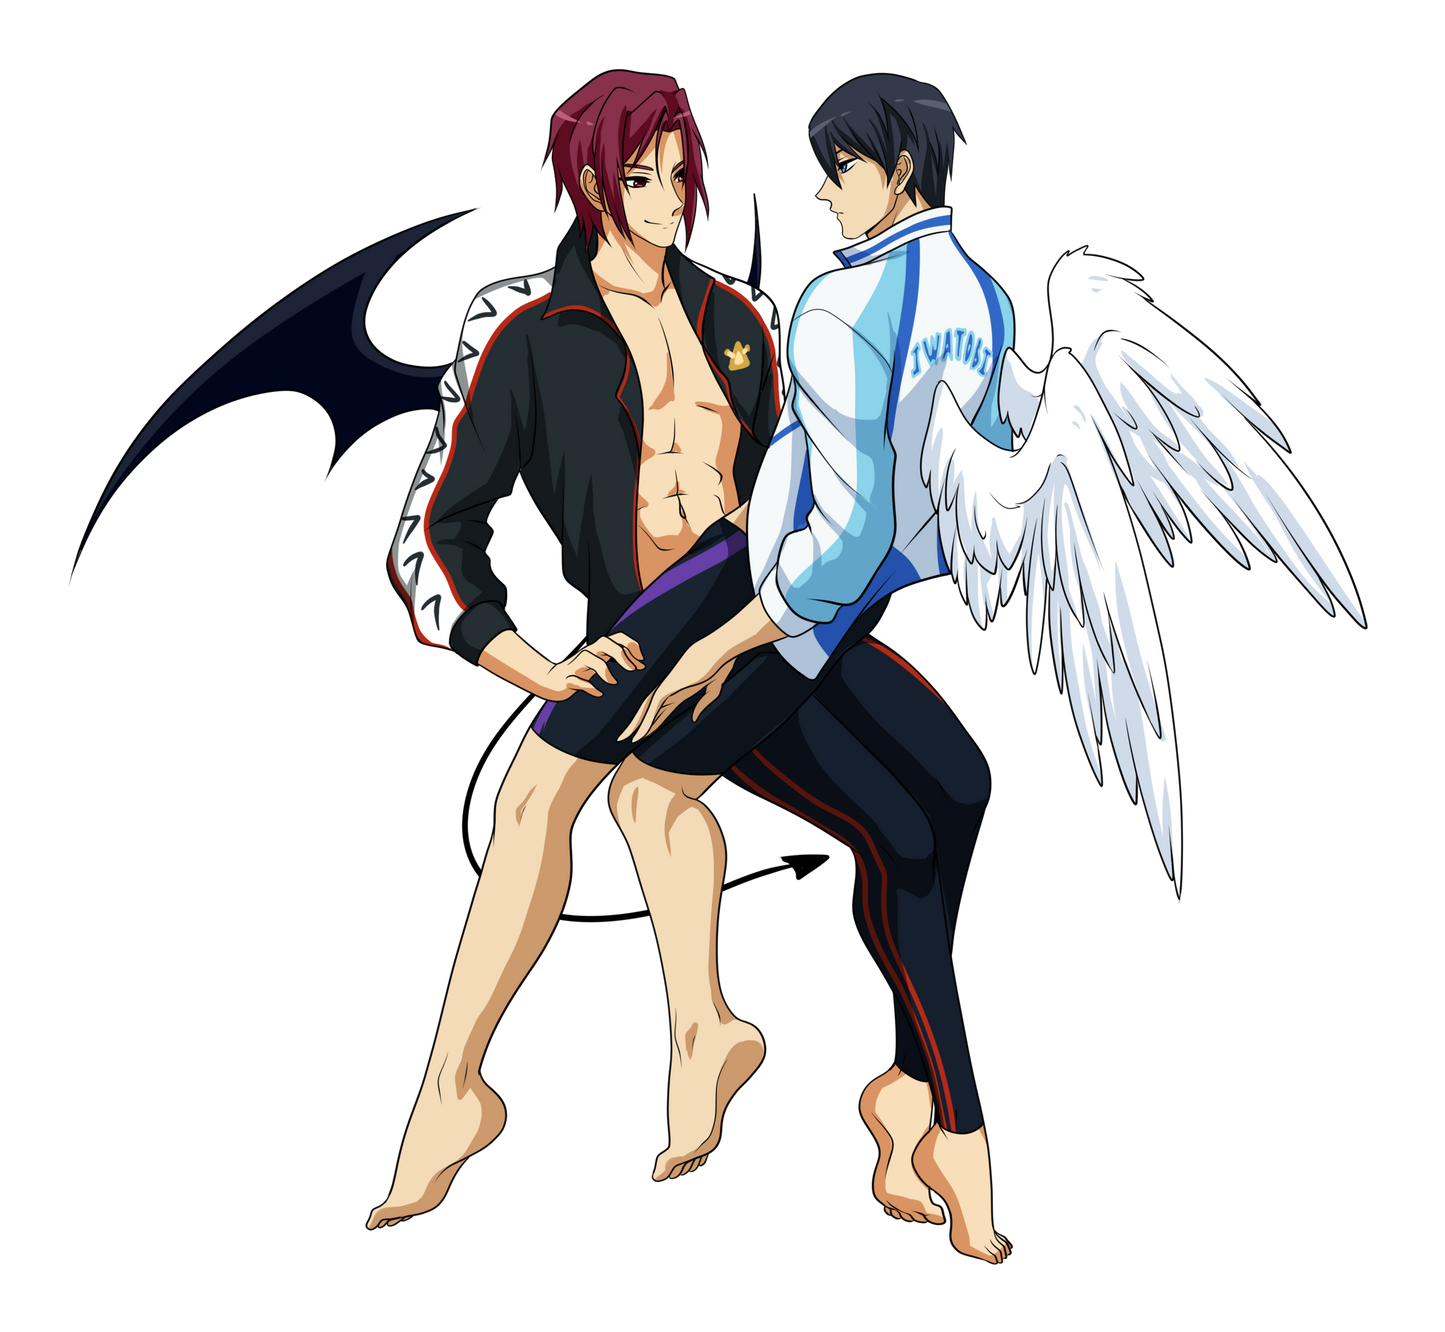 Angels and Demons: Rin and Haru